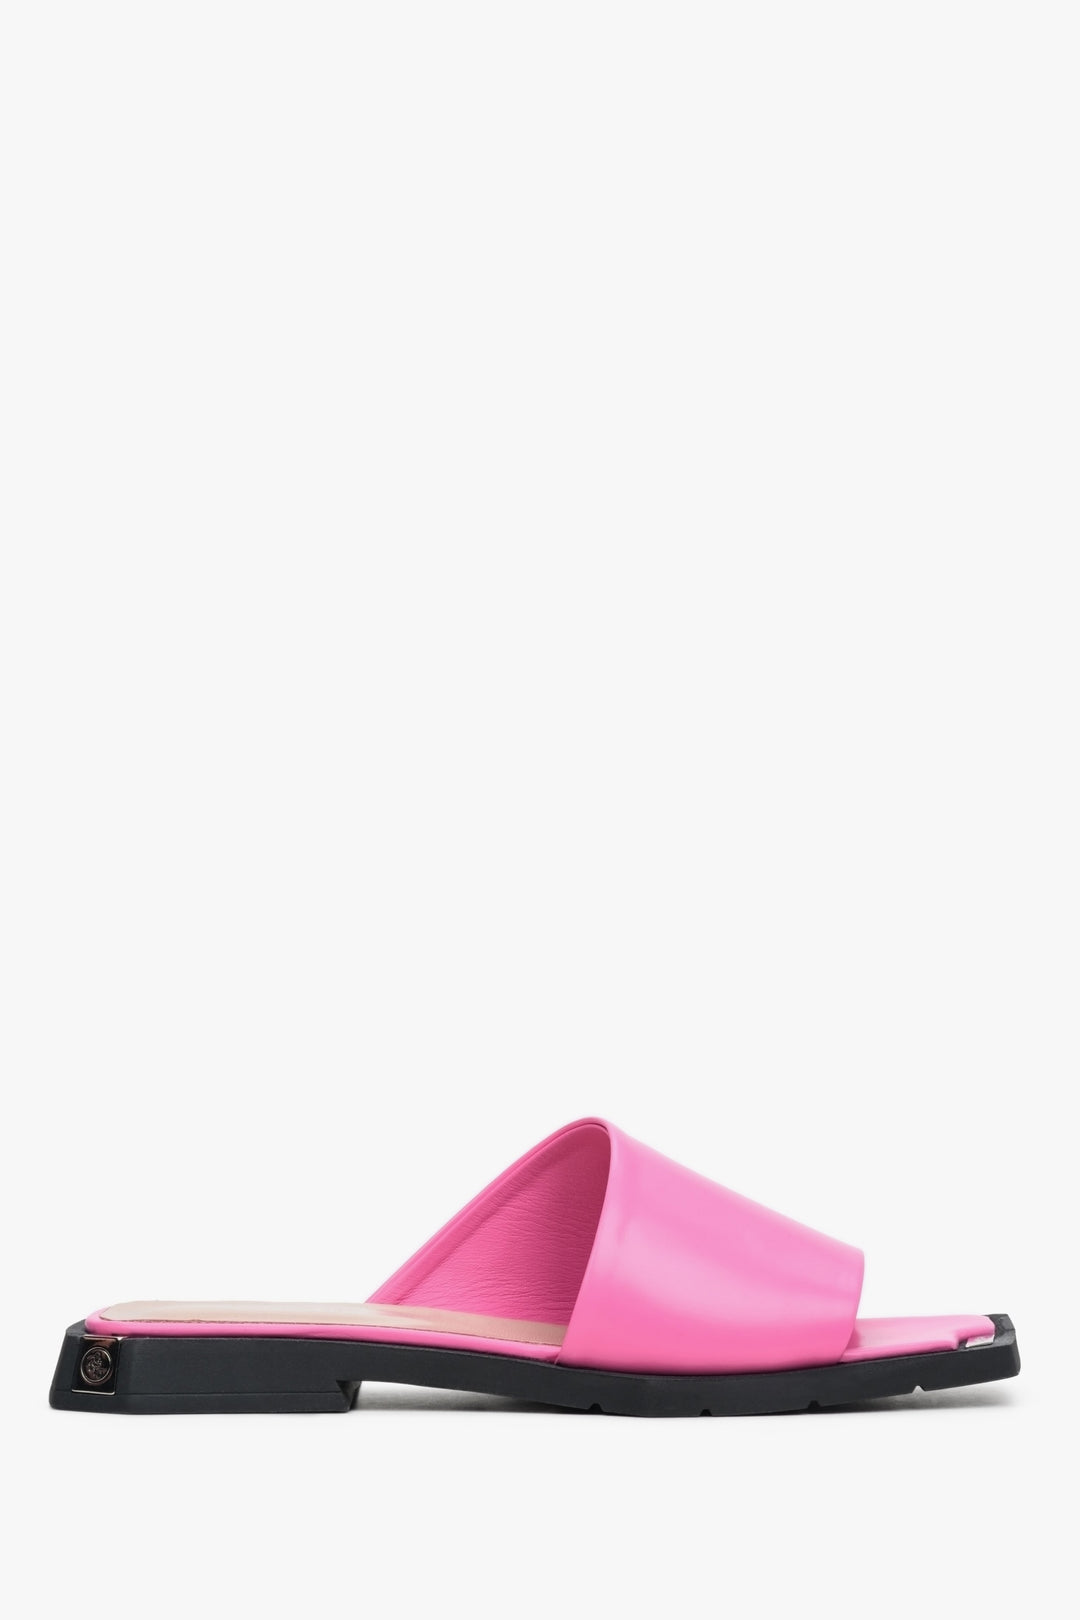 Women's flat mules for summer in pink color Estro made of natural leather - presentation of the tip and sideline of the shoes.